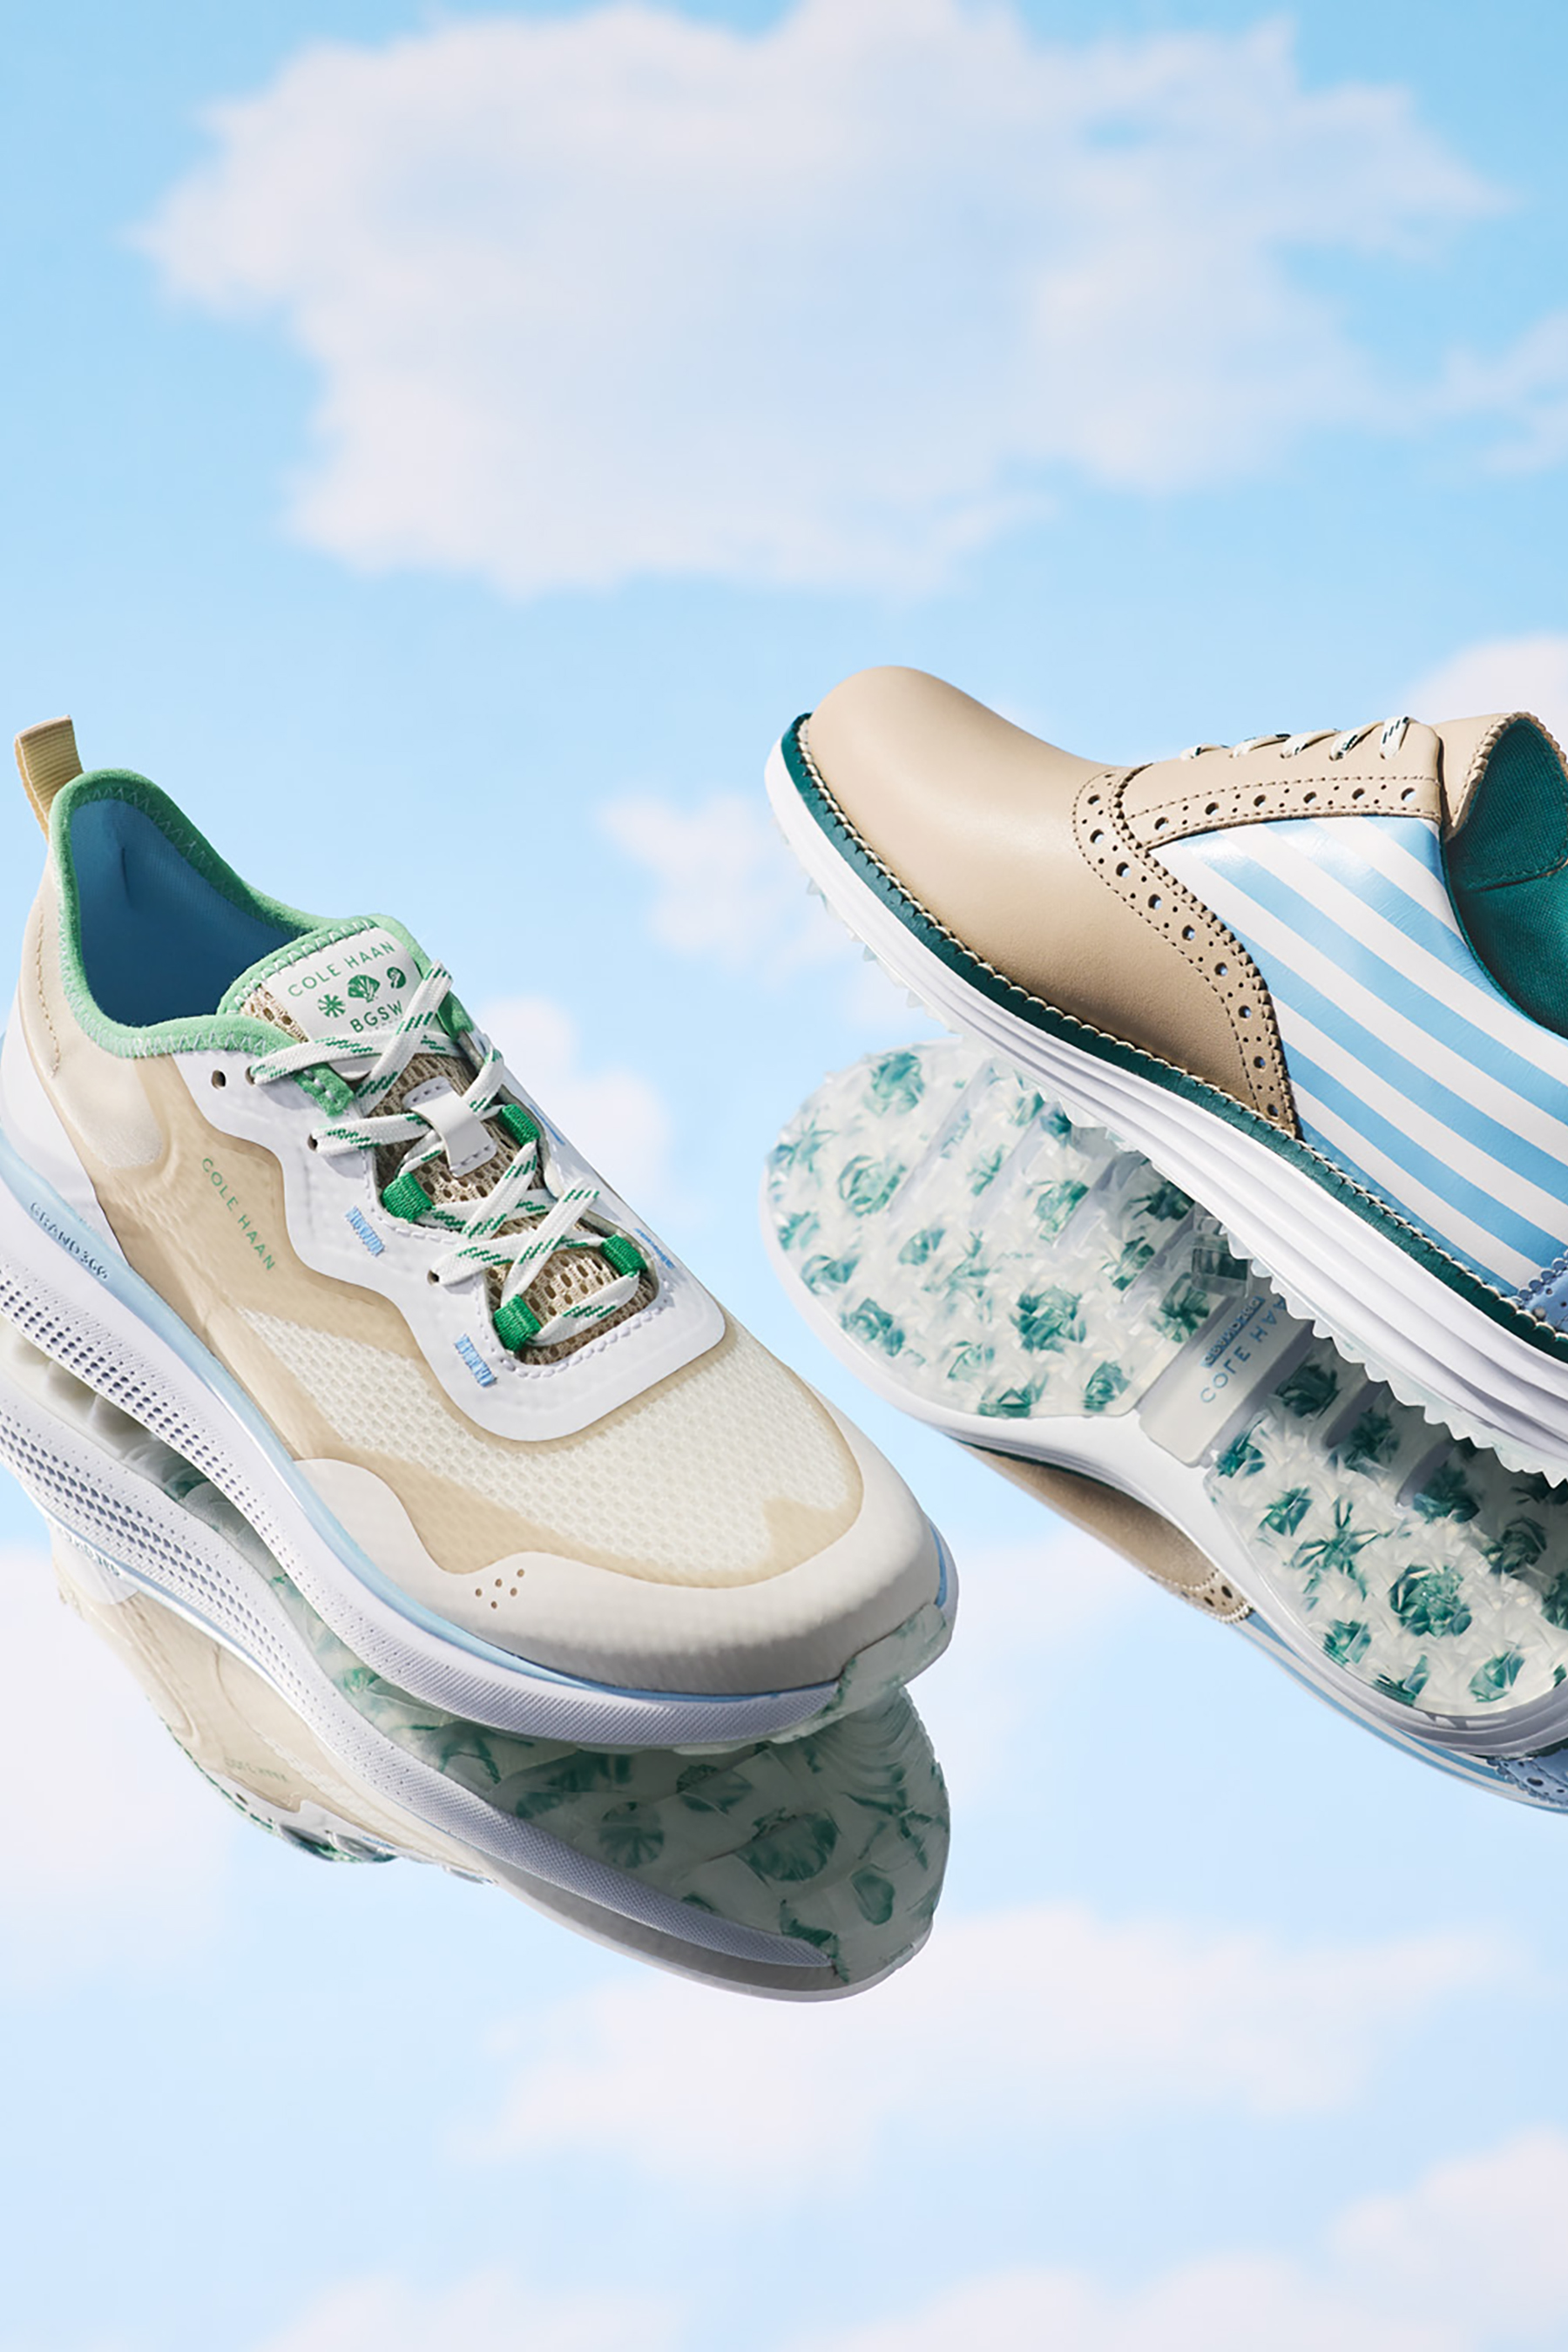 Cole Haan And Byrdie Golf Social Wear Collaborate On Limited-Edition Women’s Golf Collection